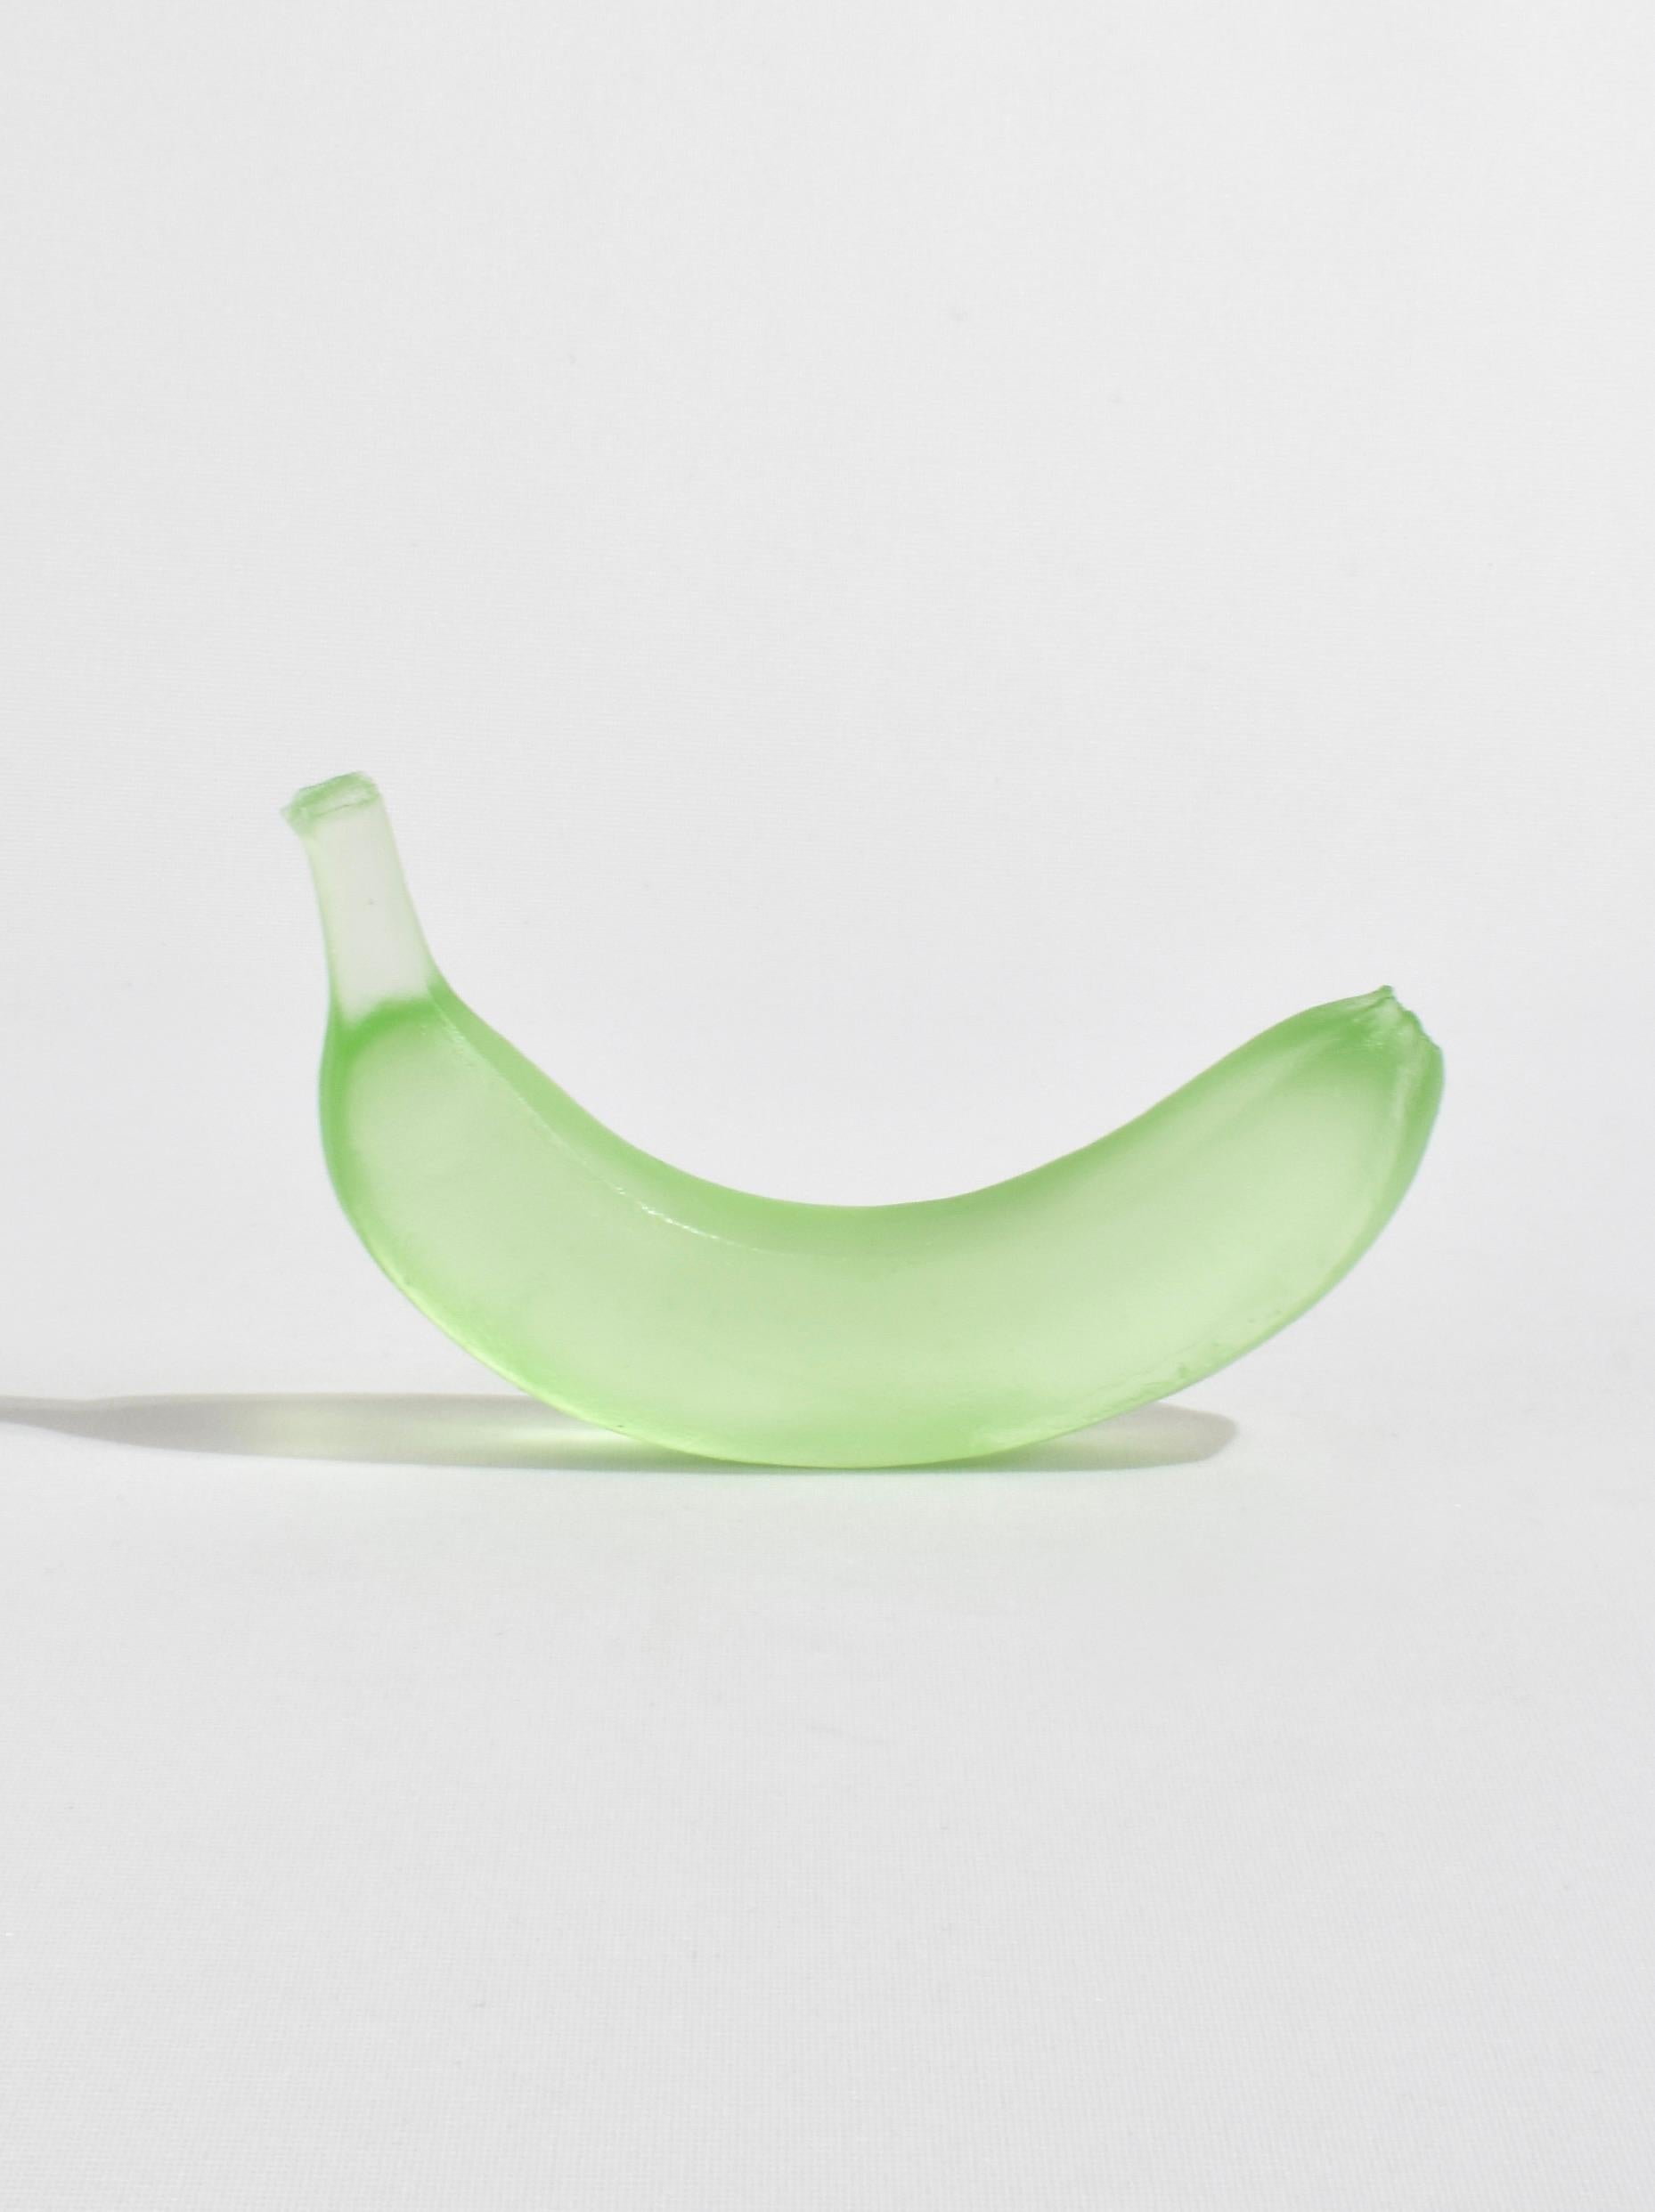 New Zealand Glass Banana in Lime For Sale